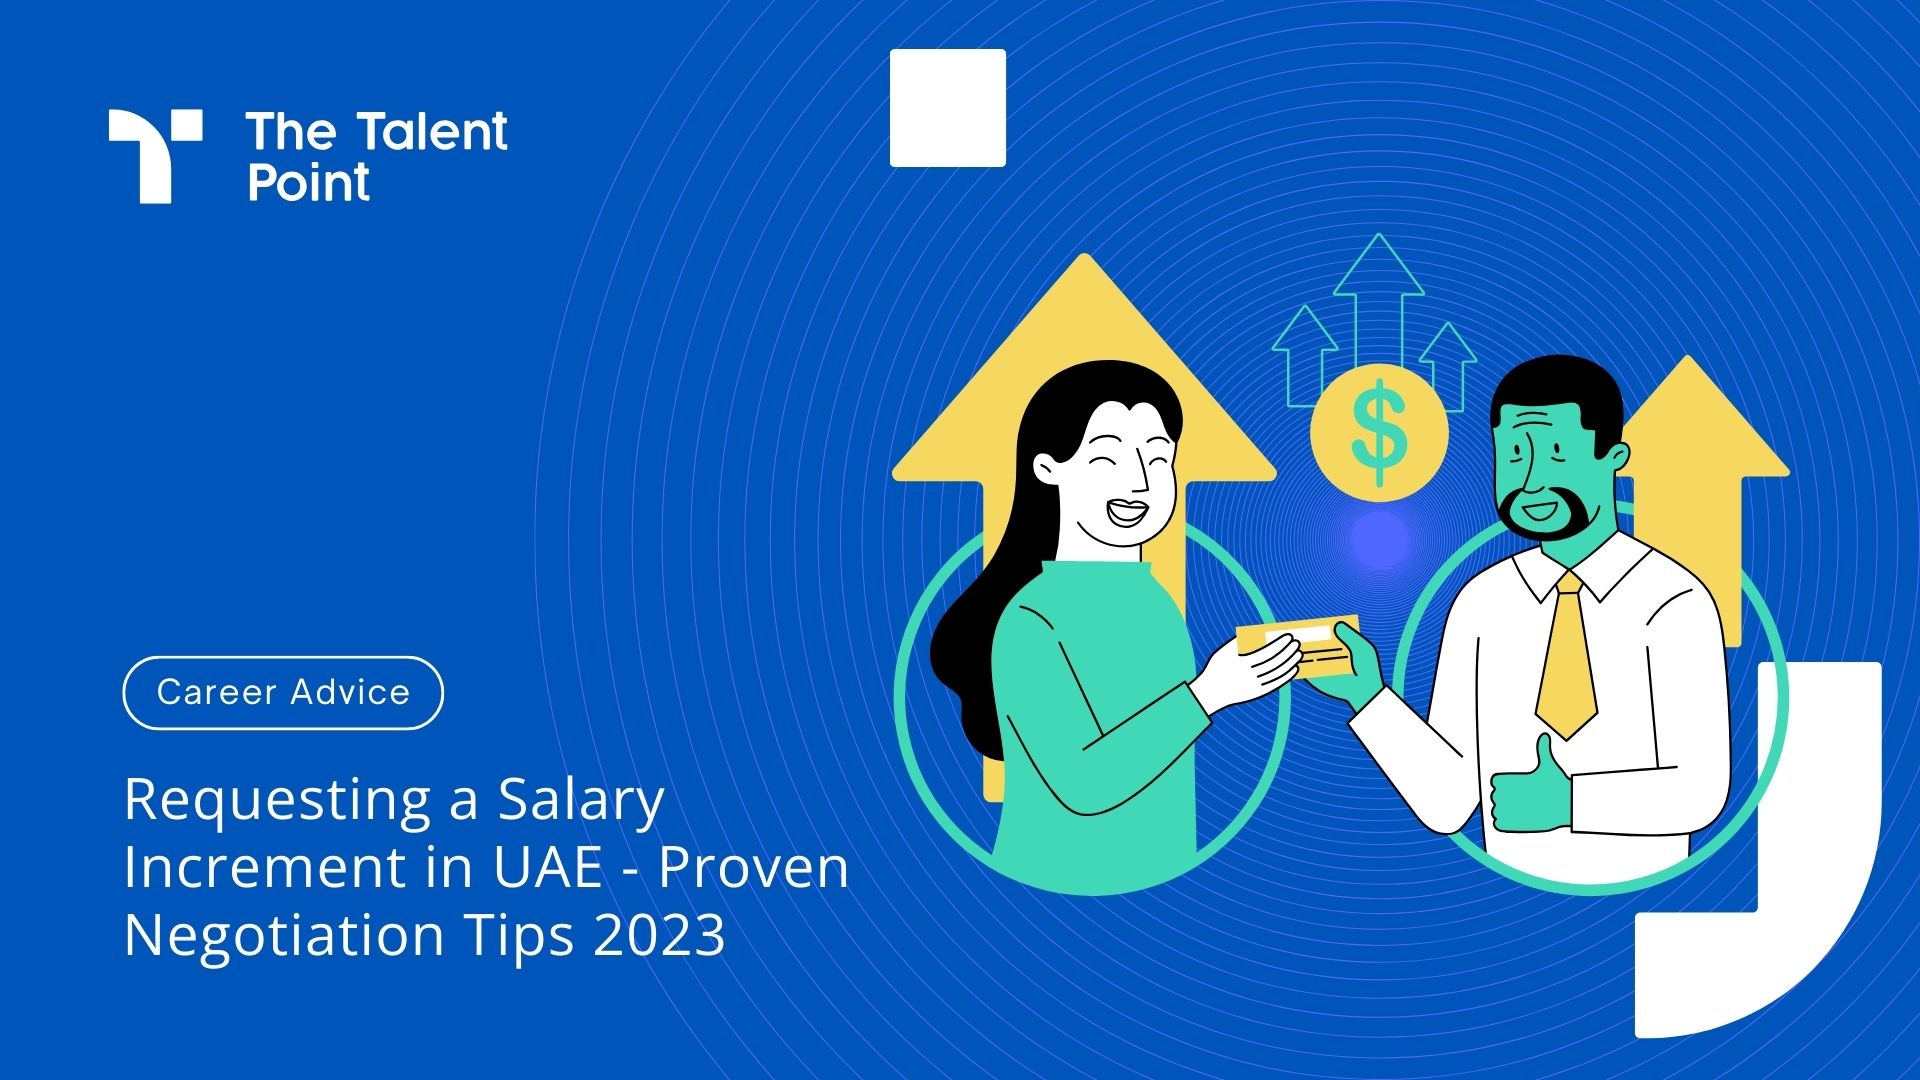 Requesting a Salary Increment in UAE - Proven Negotiation Tips 2023